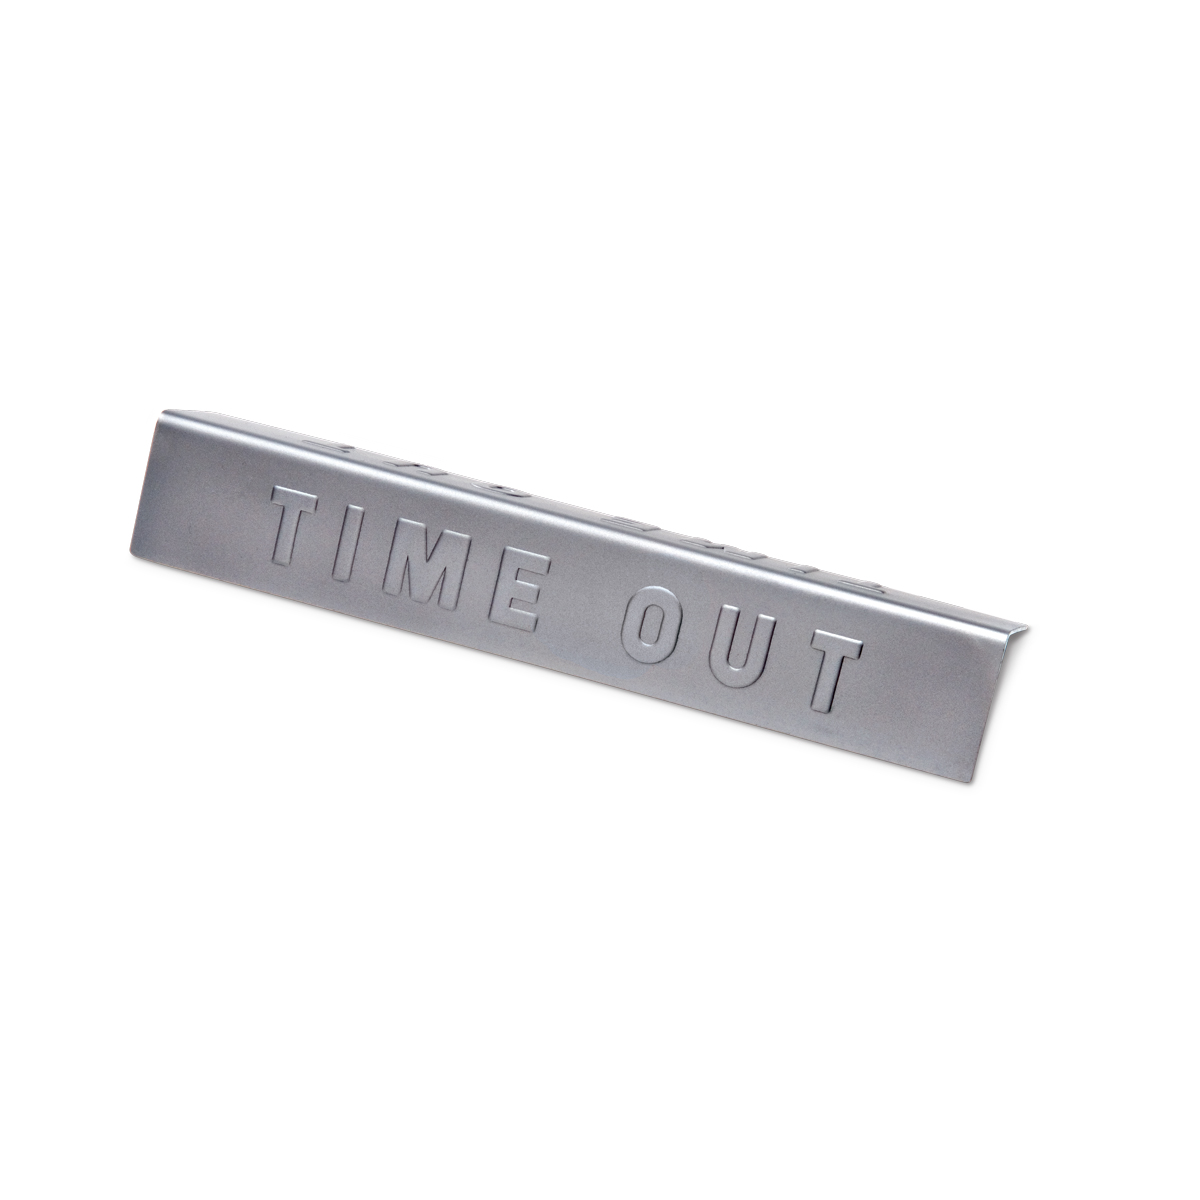 Time Out Visual Image